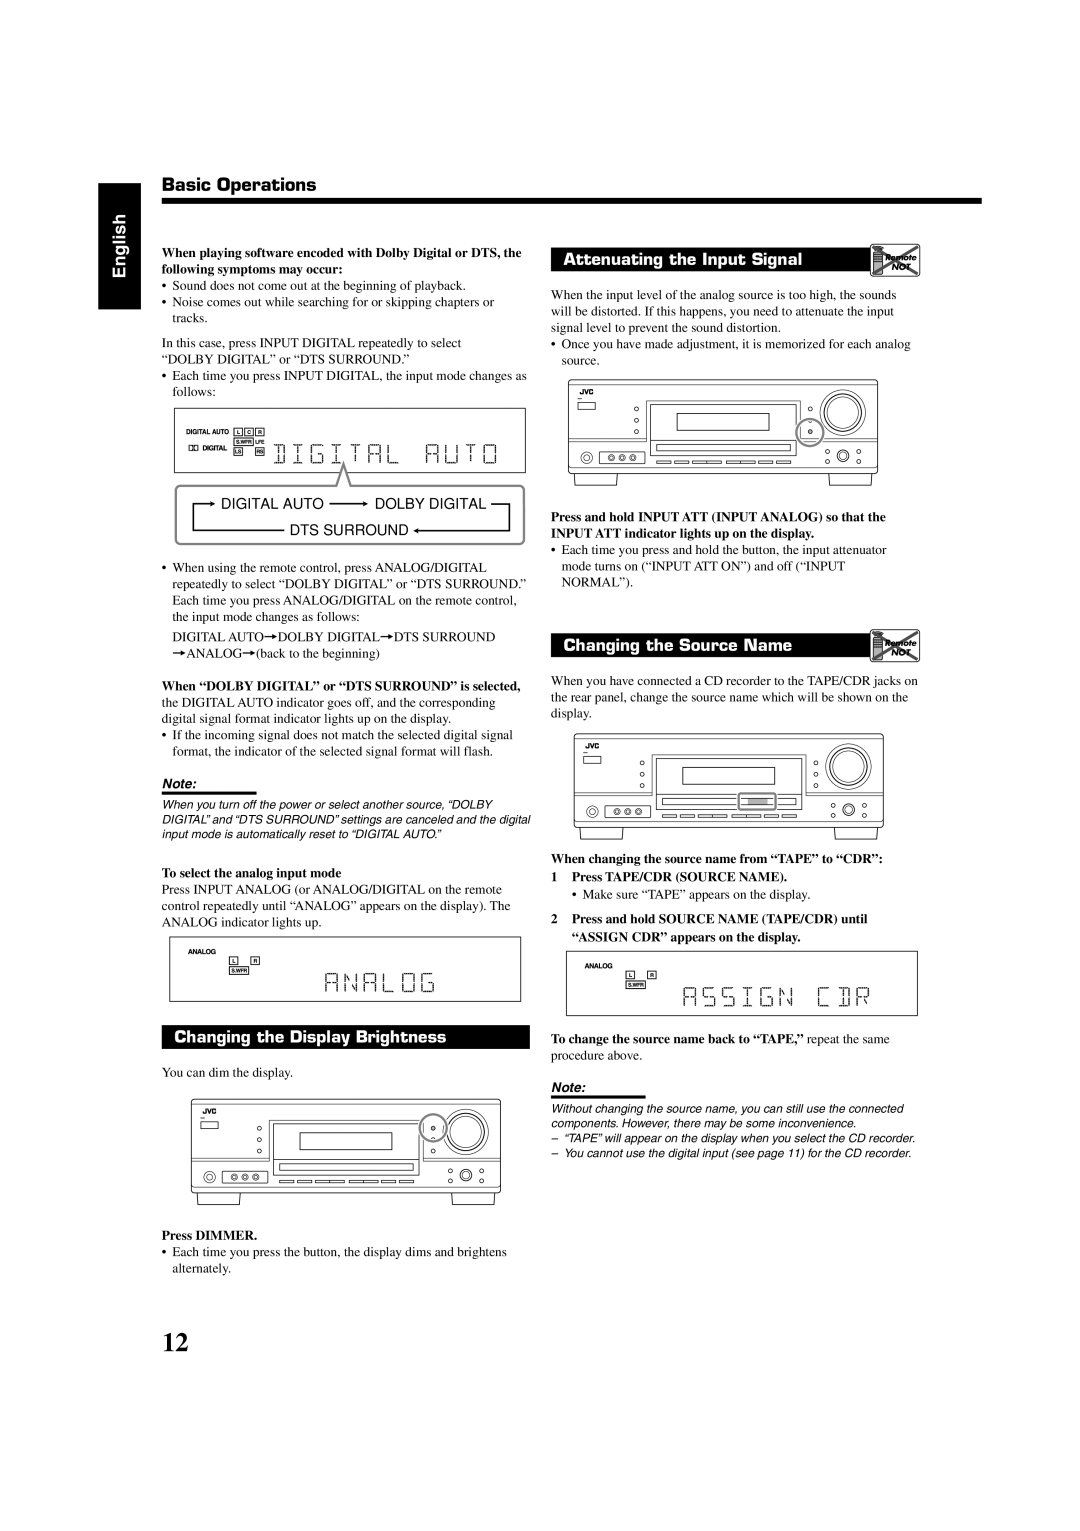 JVC LVT1507-012A manual Attenuating the Input Signal, Changing the Source Name, Changing the Display Brightness, English 